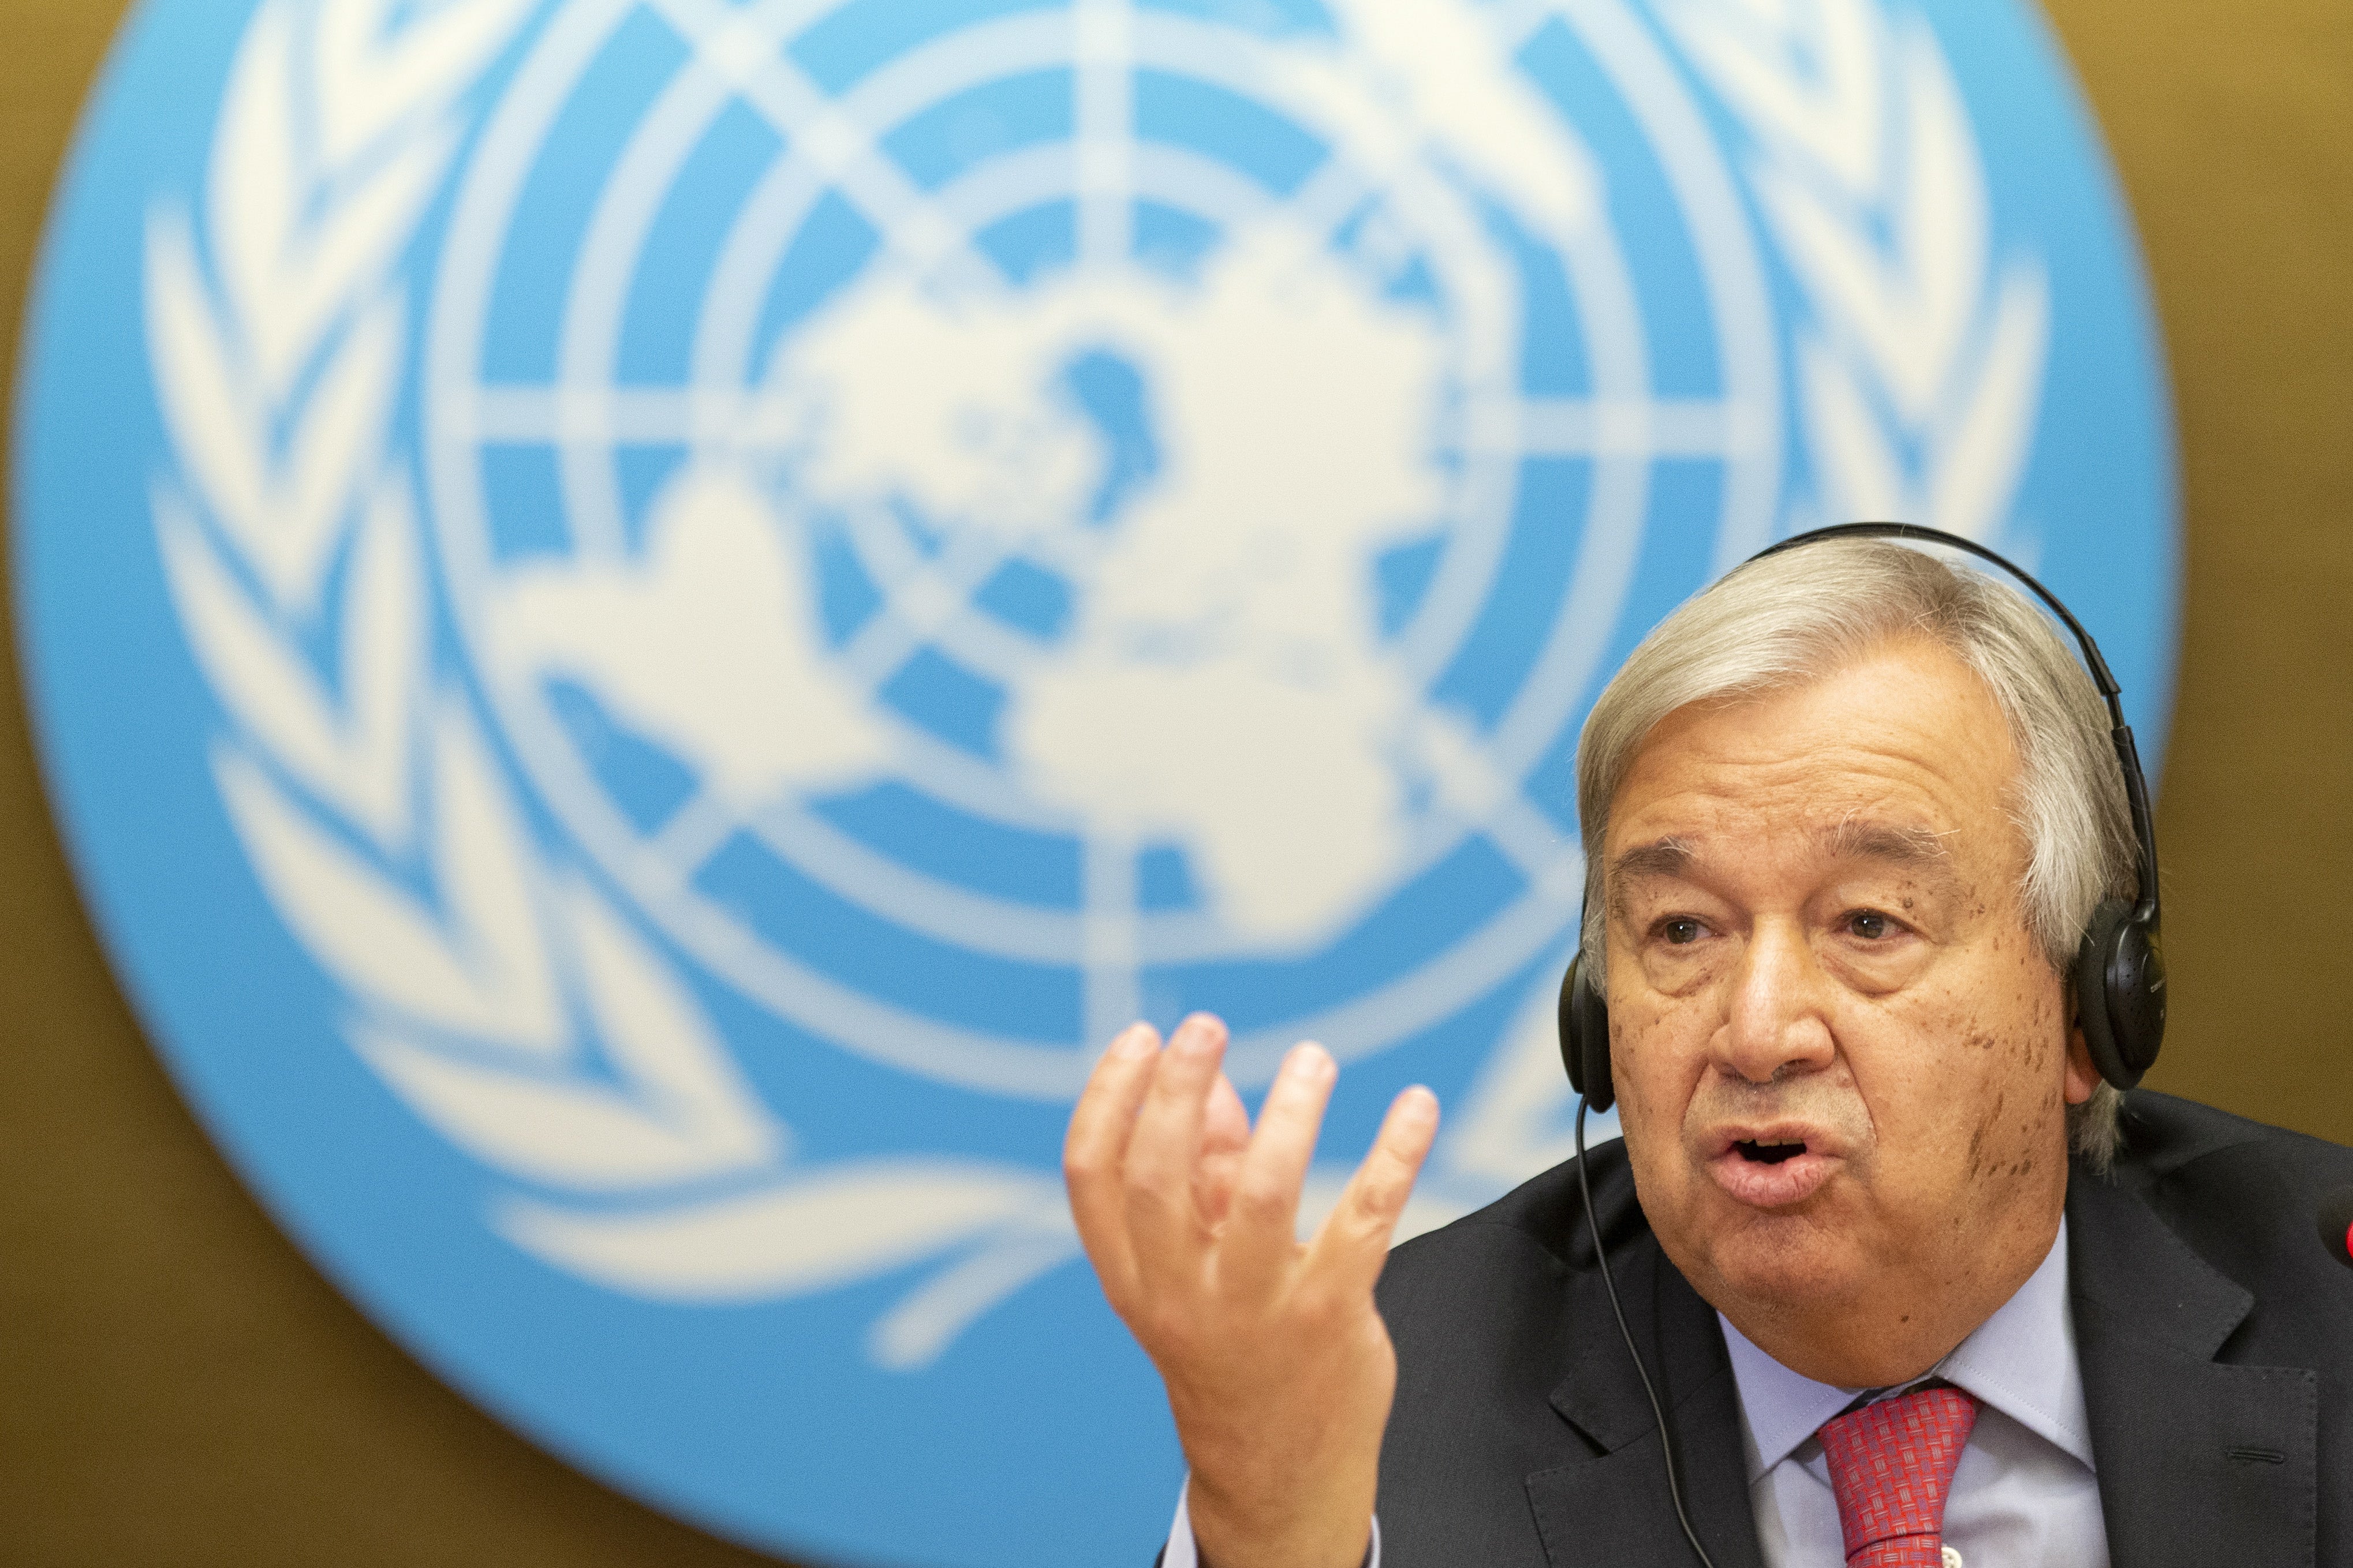 UN secretary-general Antonio Guterres talks to the media about the crisis in Afghanistan